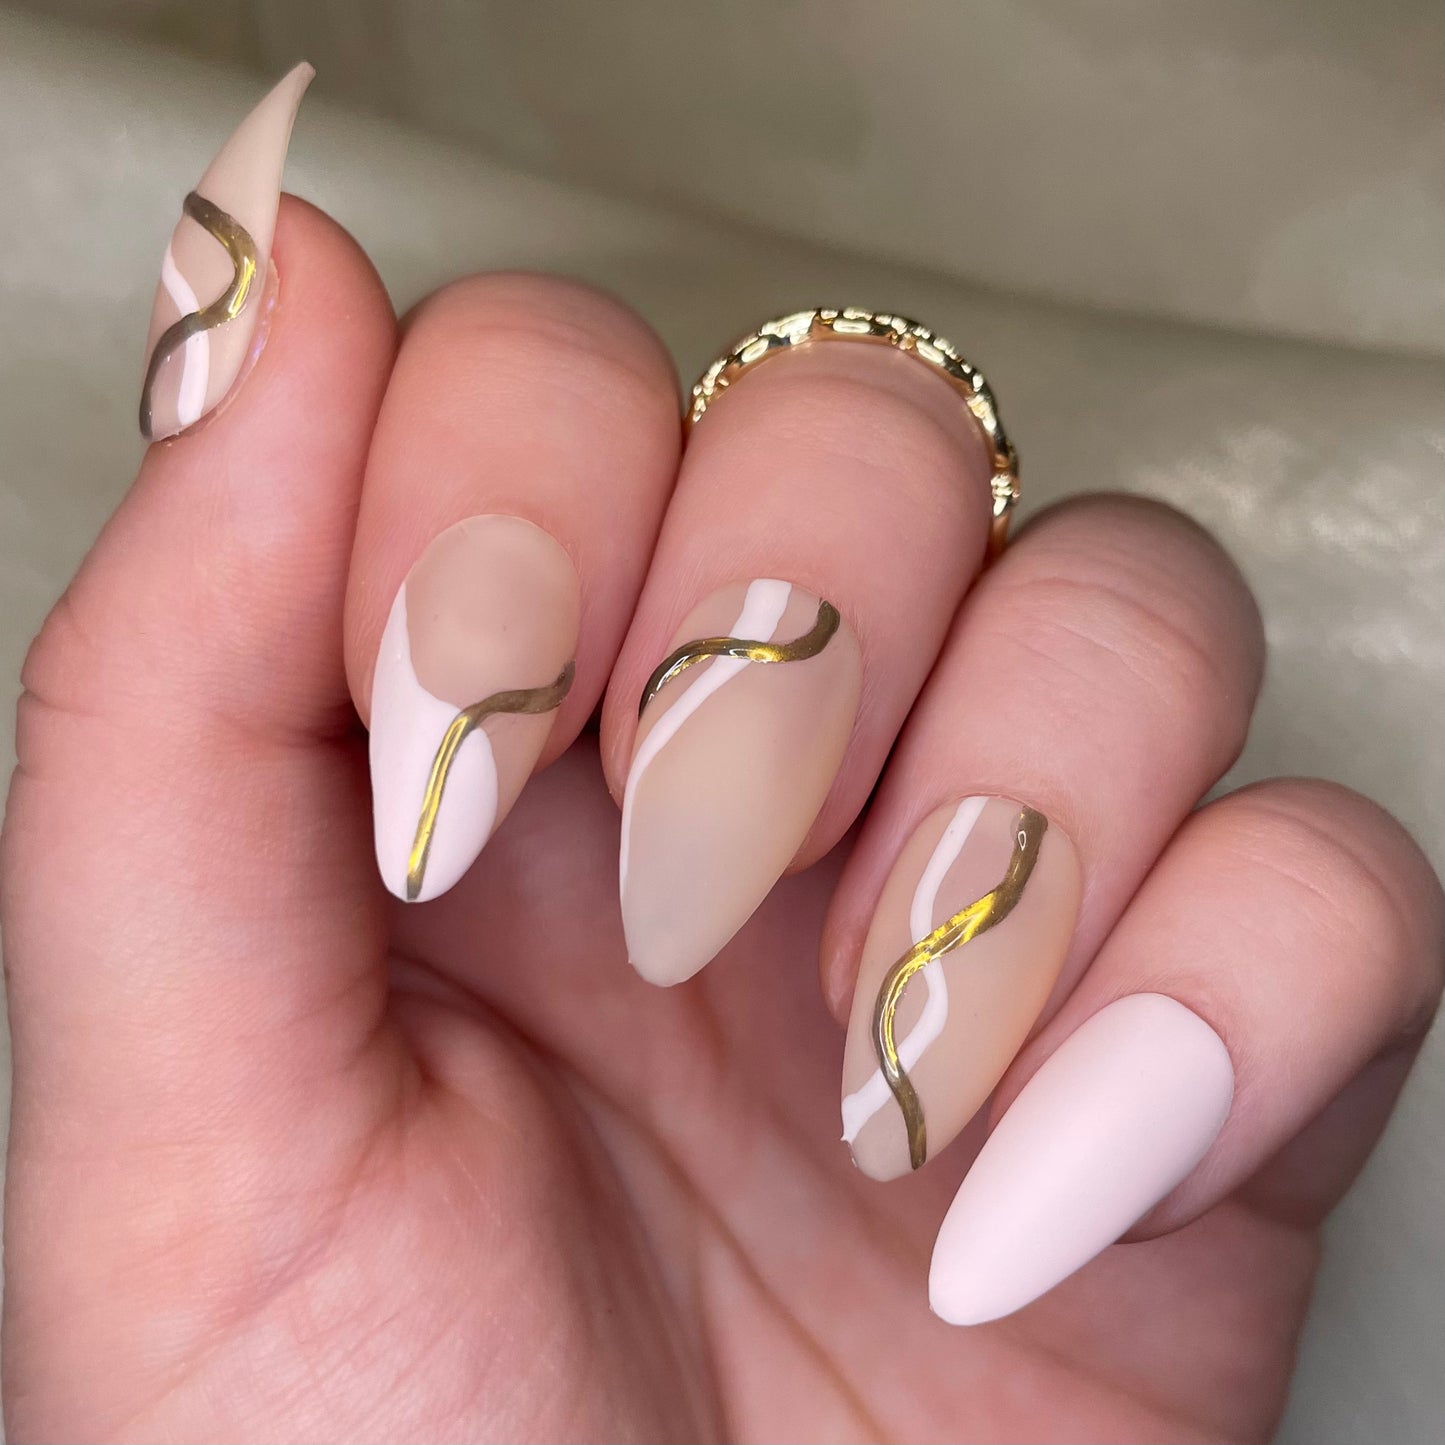 Sheer Nude and Pink Almonds with Gold Chrome